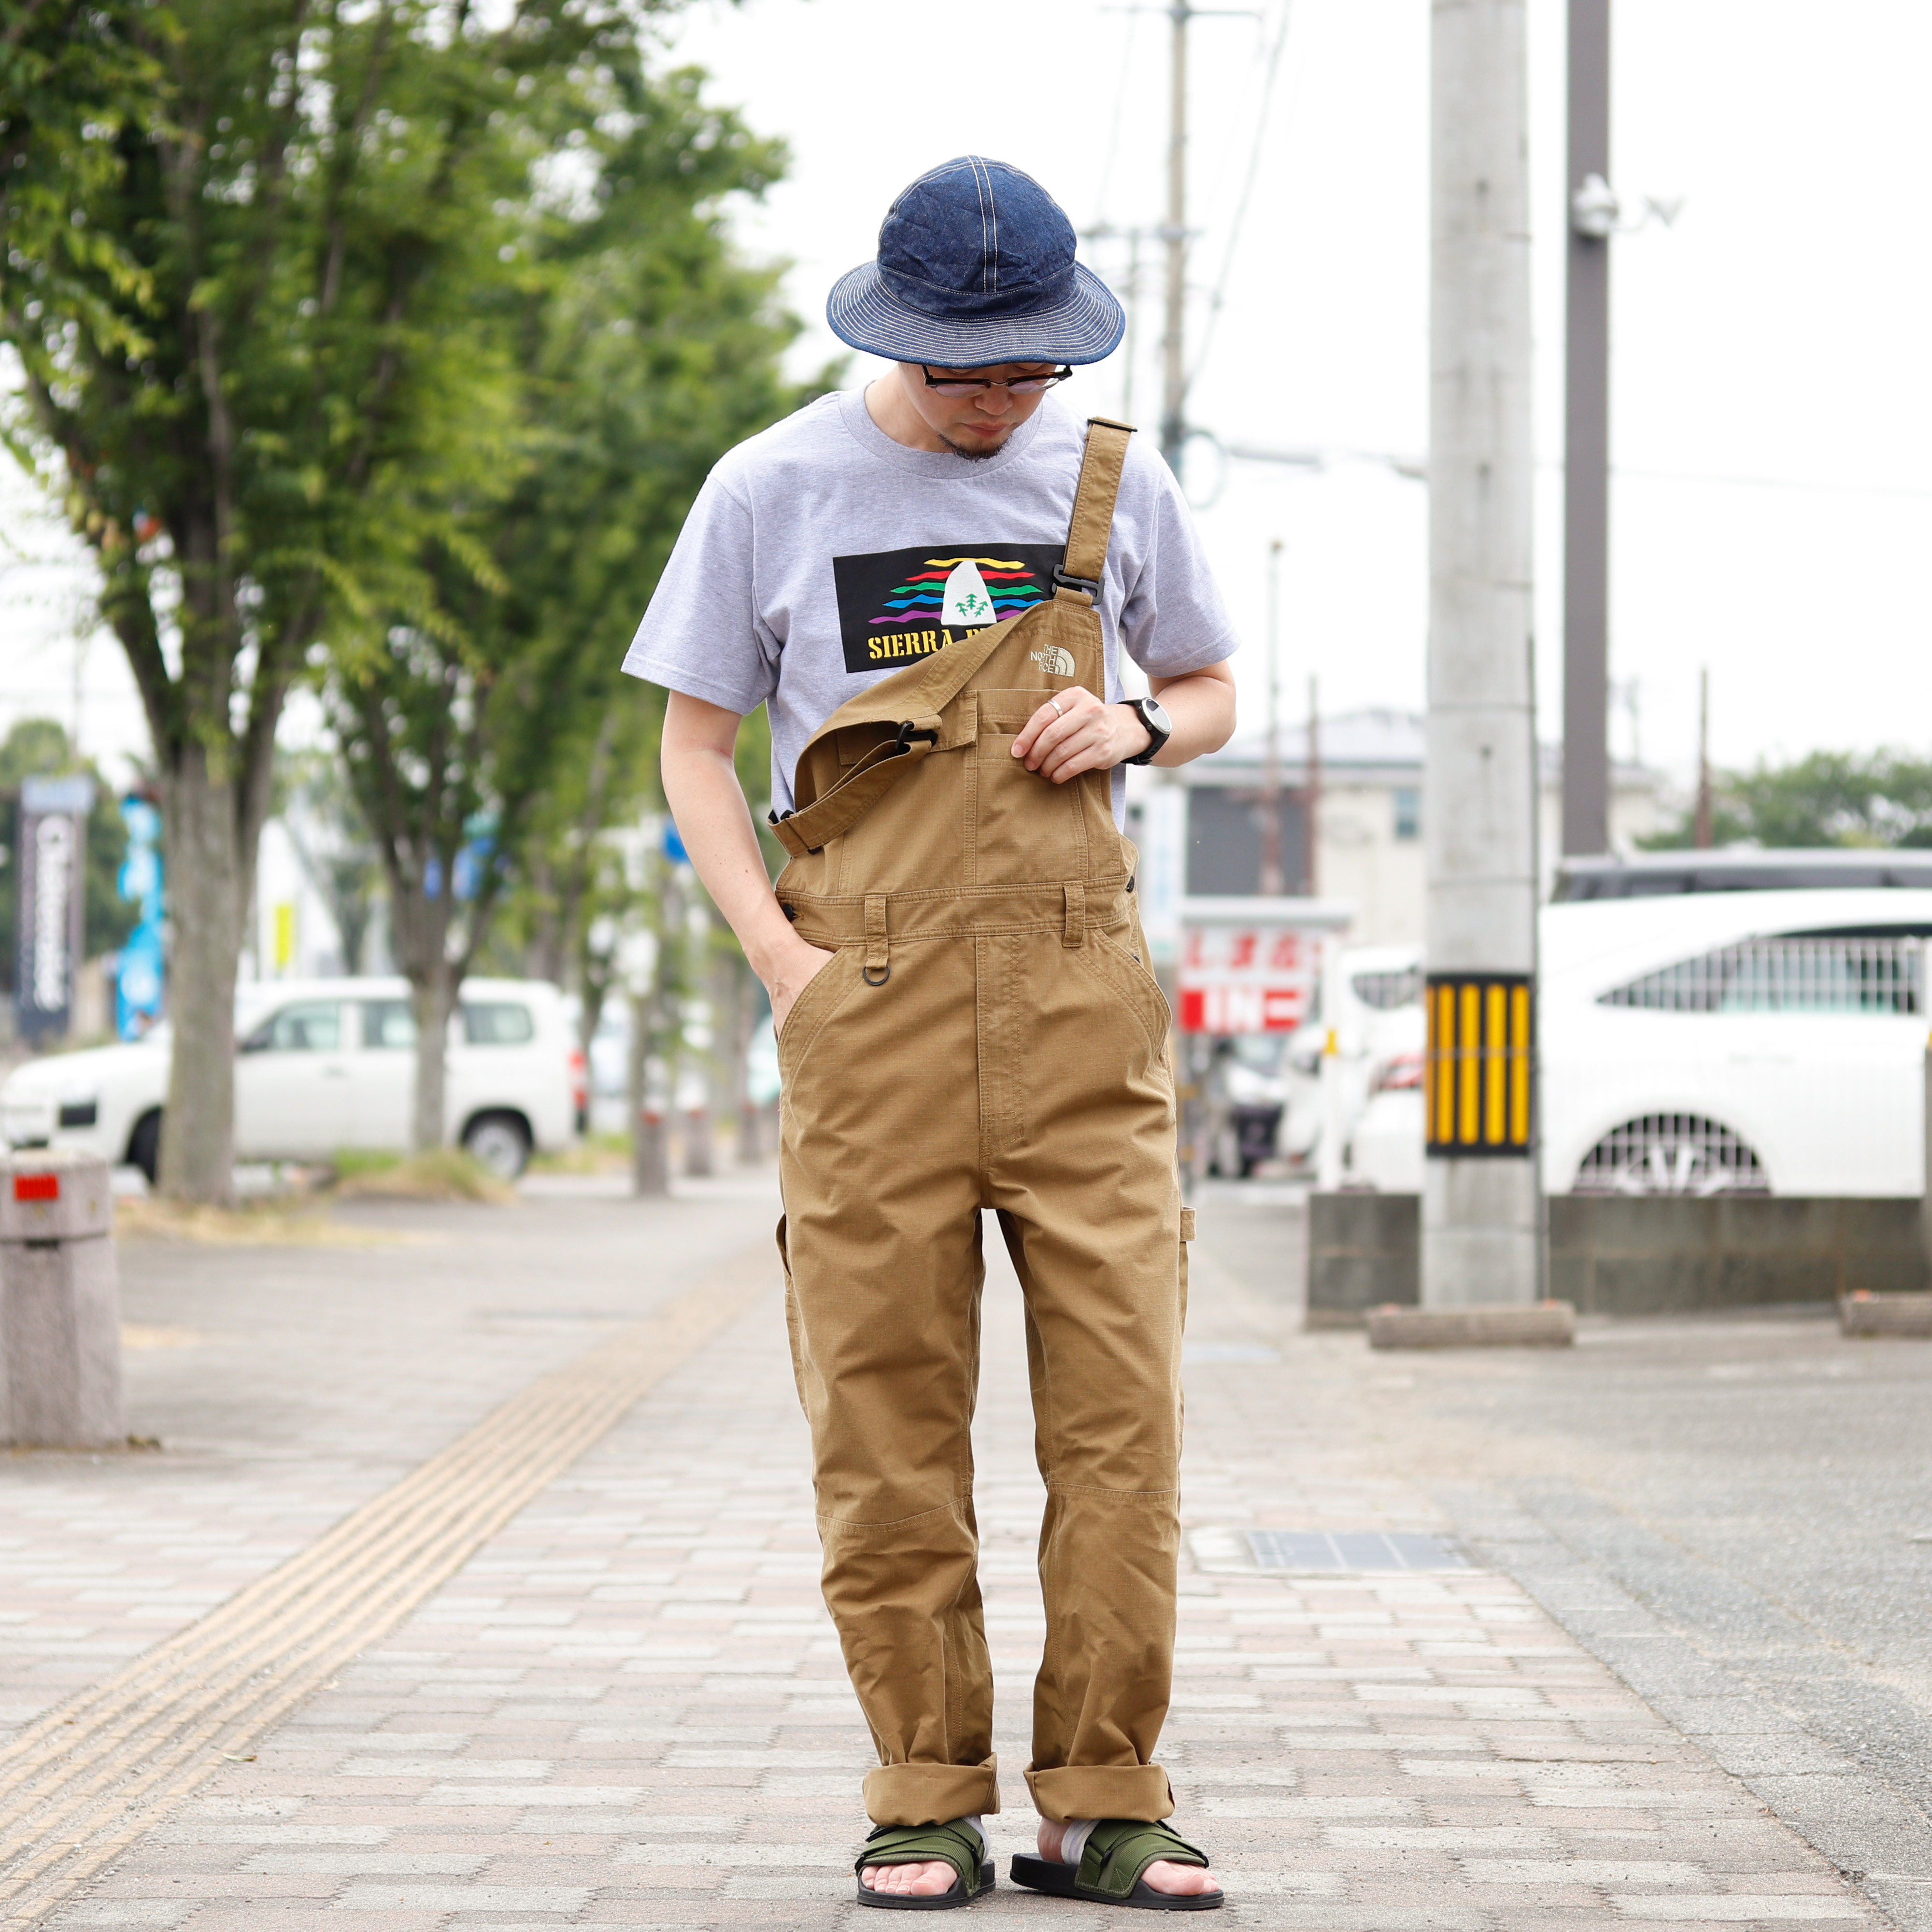 UNISEX】 THE NORTH FACE[ノースフェイス] Firefly overall 入荷